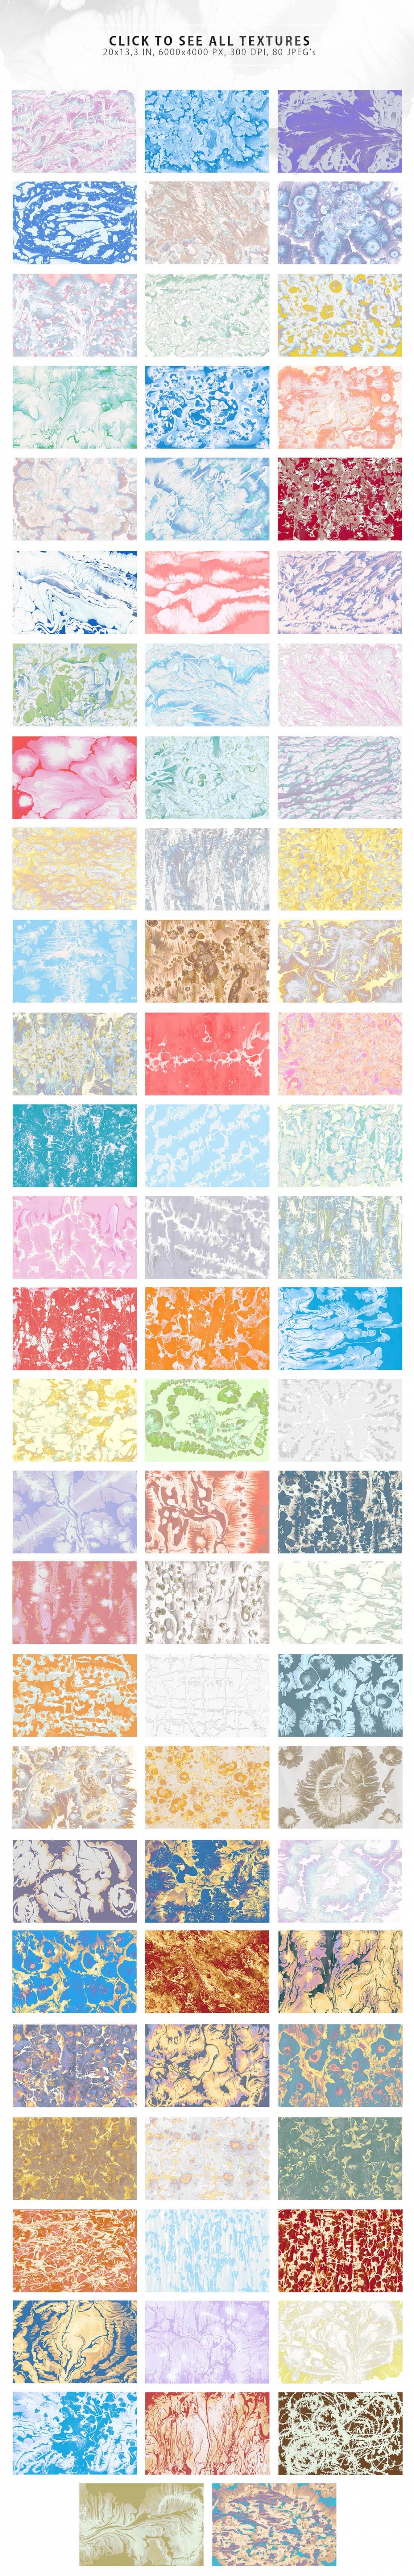 480 Super High-Resolution Painted Backgrounds - only $17! -Business ...